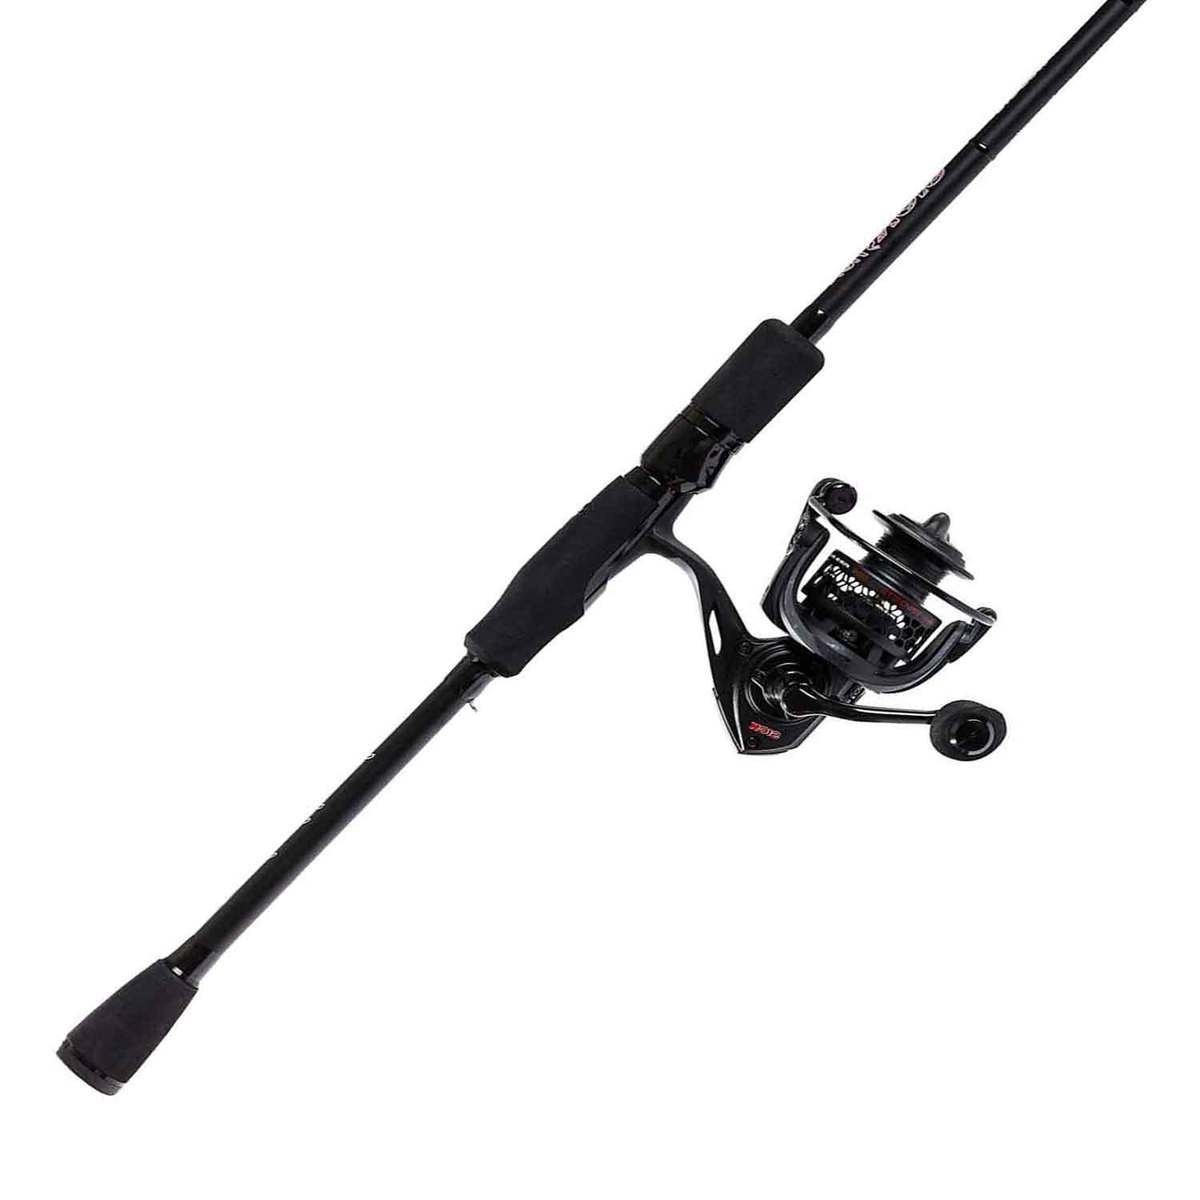 Favorite USA Sick Stick Spinning Combo - 7ft 1in, Medium Heavy